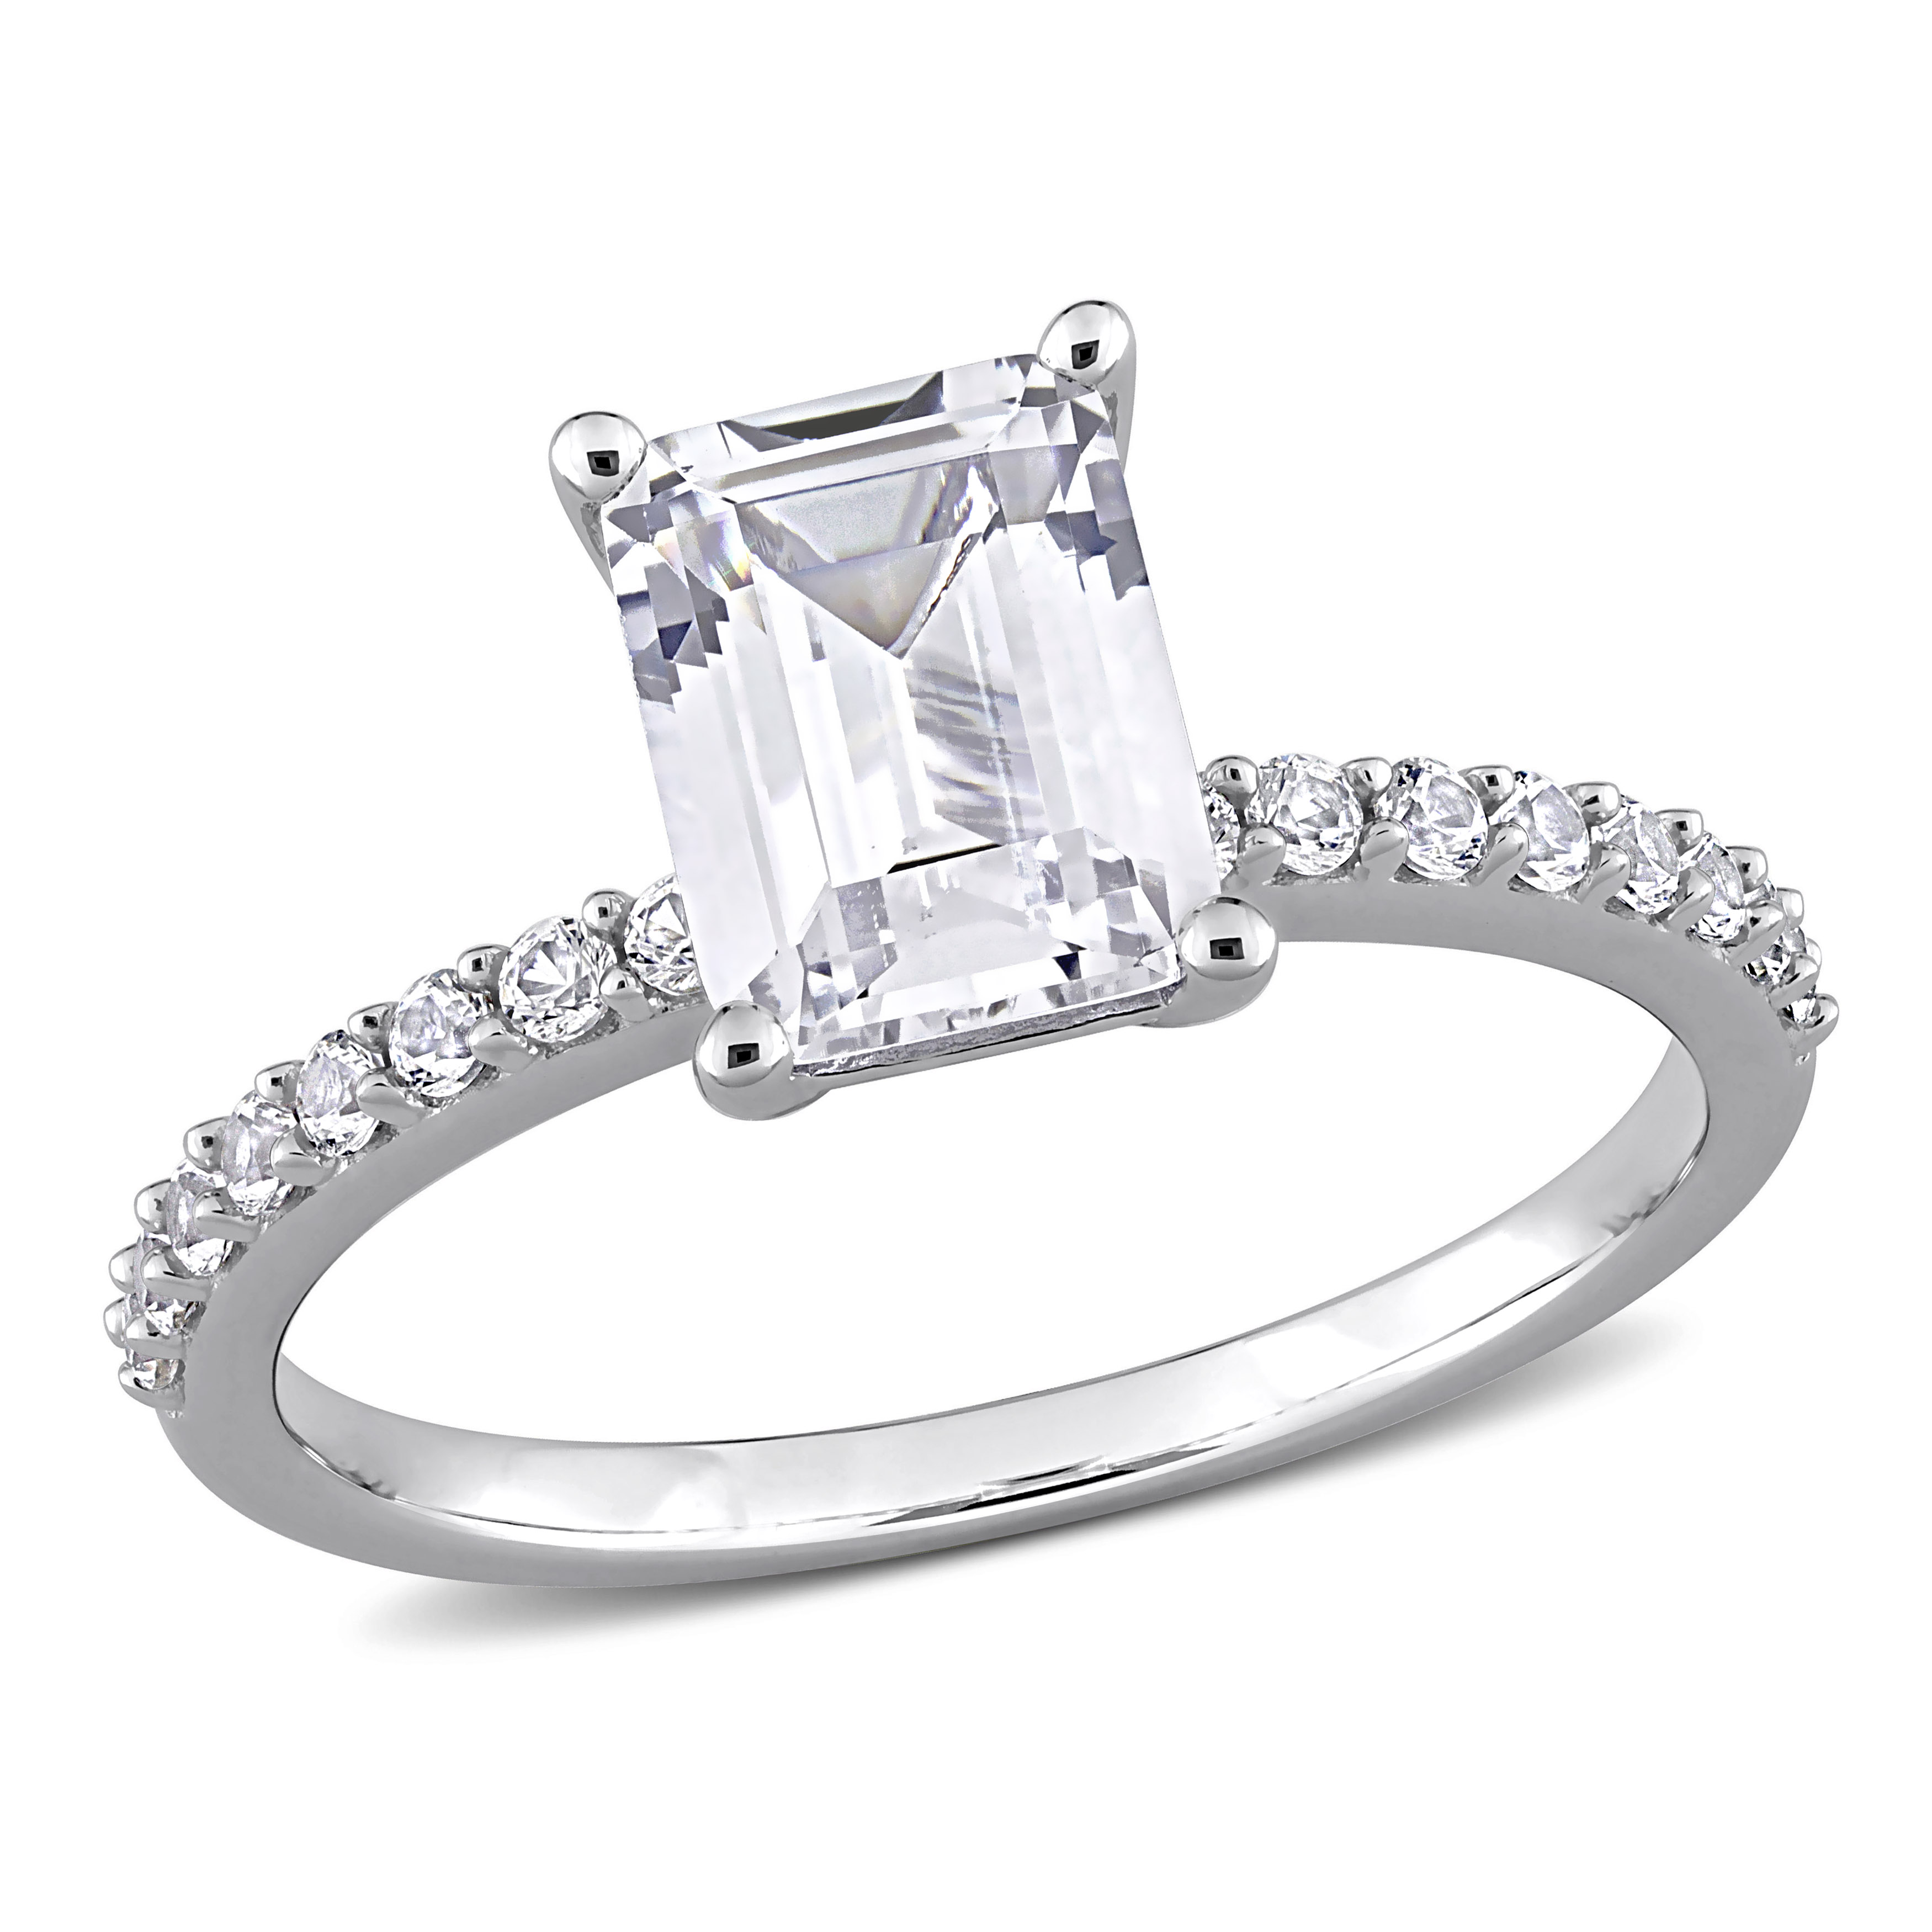 2 1/3 CT TGW Emerald Cut Created White Sapphire Solitaire Engagement Ring in 10k White Gold